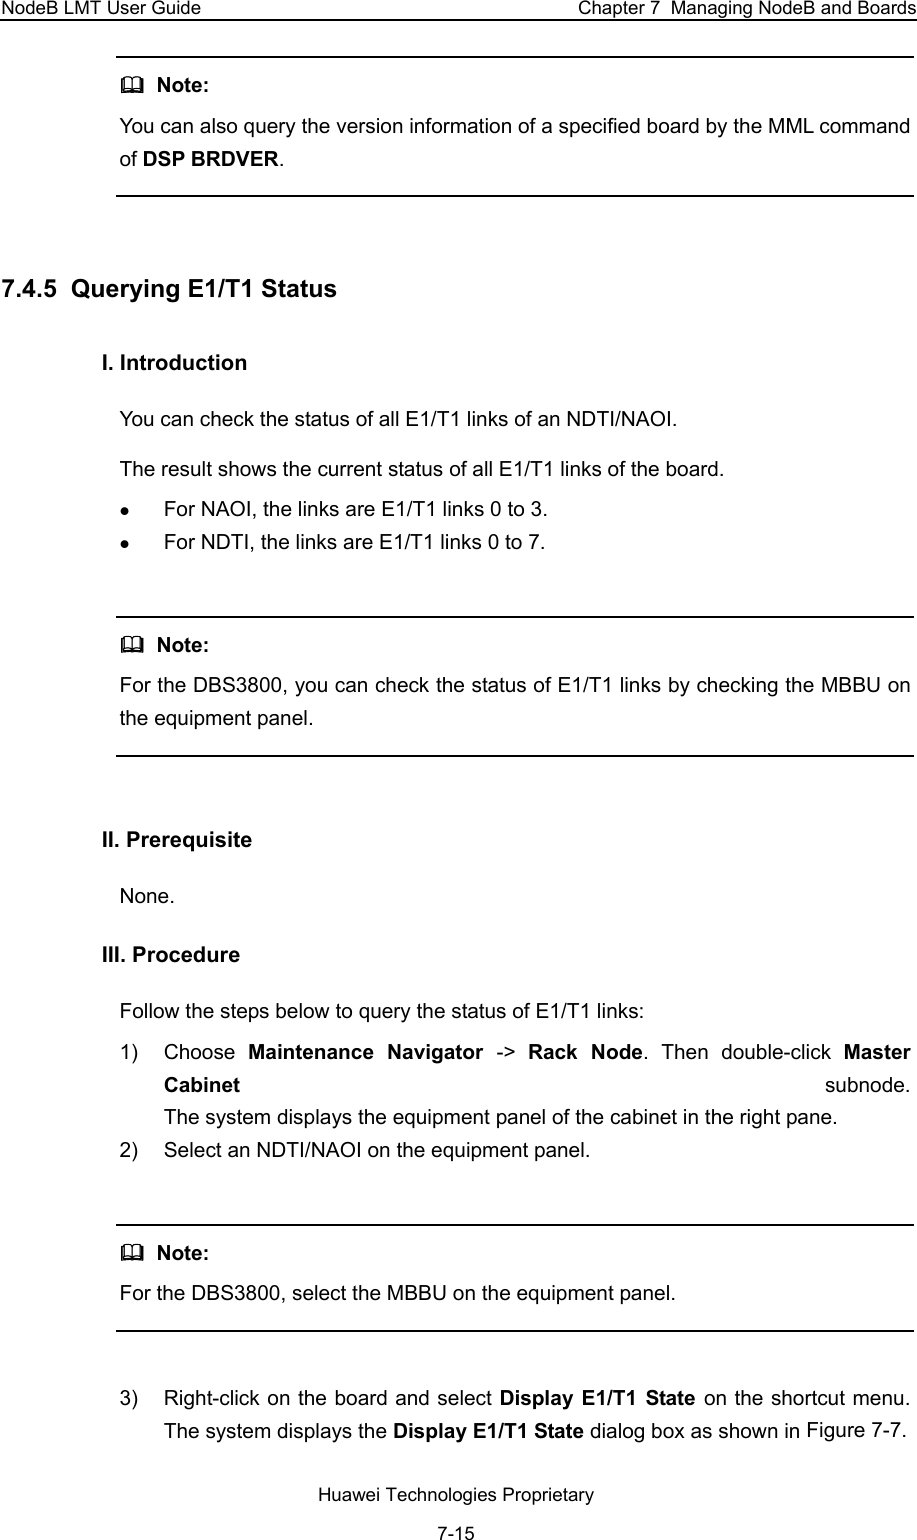 NodeB LMT User Guide  Chapter 7  Managing NodeB and Boards   Note:  You can also query the version information of a specified board by the MML command of DSP BRDVER.   7.4.5  Querying E1/T1 Status  I. Introduction  You can check the status of all E1/T1 links of an NDTI/NAOI. The result shows the current status of all E1/T1 links of the board.  z For NAOI, the links are E1/T1 links 0 to 3.  z For NDTI, the links are E1/T1 links 0 to 7.    Note:  For the DBS3800, you can check the status of E1/T1 links by checking the MBBU on the equipment panel.   II. Prerequisite None.  III. Procedure  Follow the steps below to query the status of E1/T1 links:  1) Choose Maintenance Navigator -&gt;  Rack Node. Then double-click Master Cabinet  subnode.  The system displays the equipment panel of the cabinet in the right pane.  2)  Select an NDTI/NAOI on the equipment panel.     Note:  For the DBS3800, select the MBBU on the equipment panel.   3)  Right-click on the board and select Display E1/T1 State on the shortcut menu. The system displays the Display E1/T1 State dialog box as shown in Figure 7-7.  Huawei Technologies Proprietary 7-15 